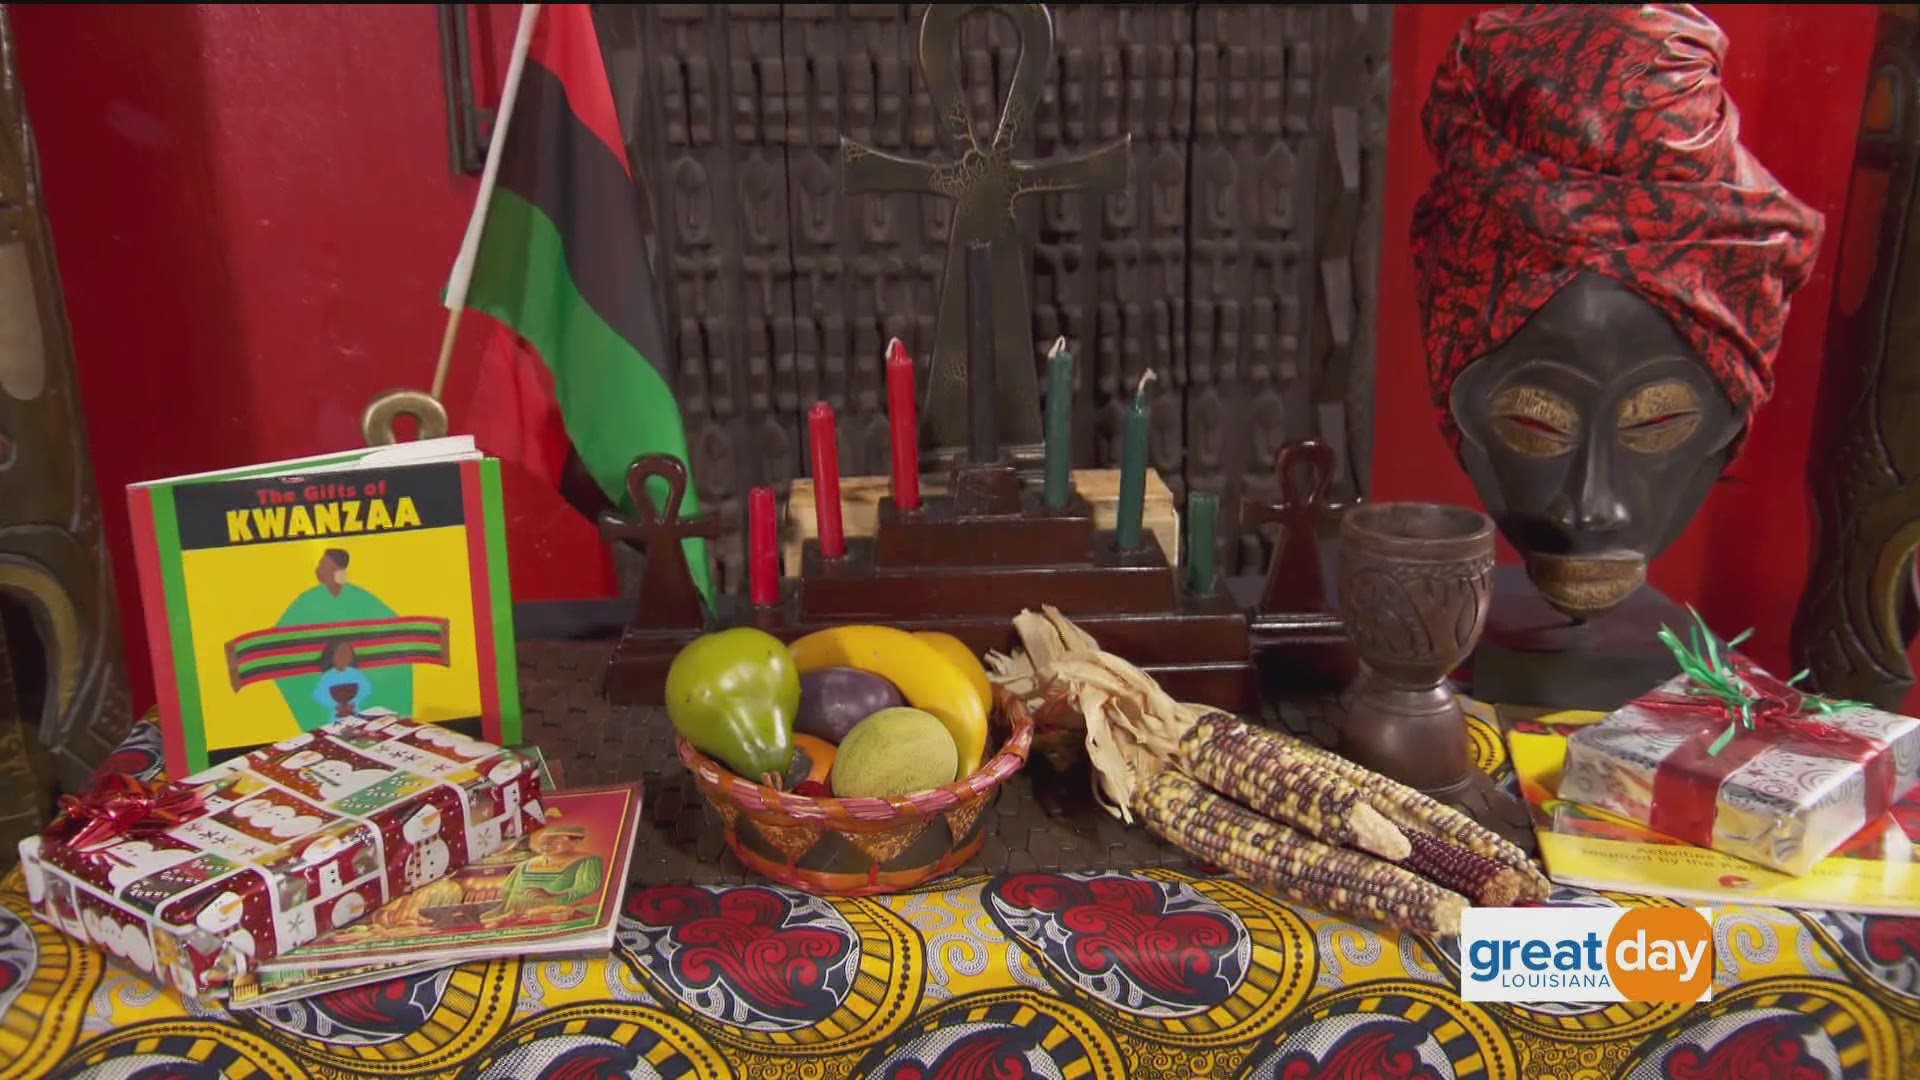 Malik Mingo spoke with the Ashé Cultural Arts Center about the meaning of Kwanzaa.